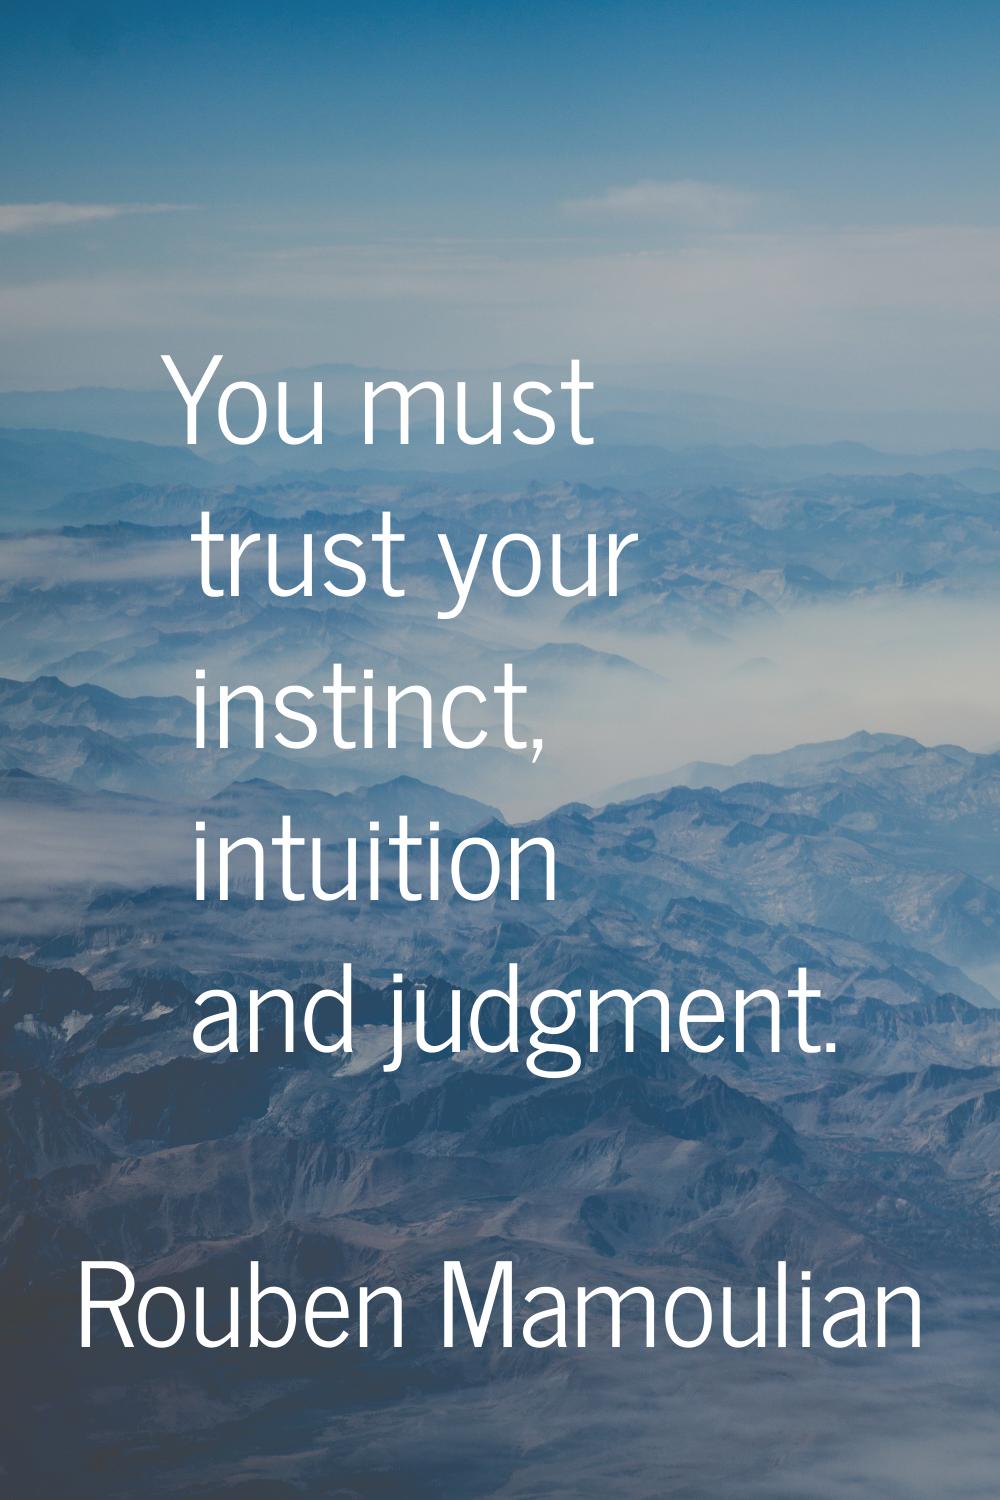 You must trust your instinct, intuition and judgment.